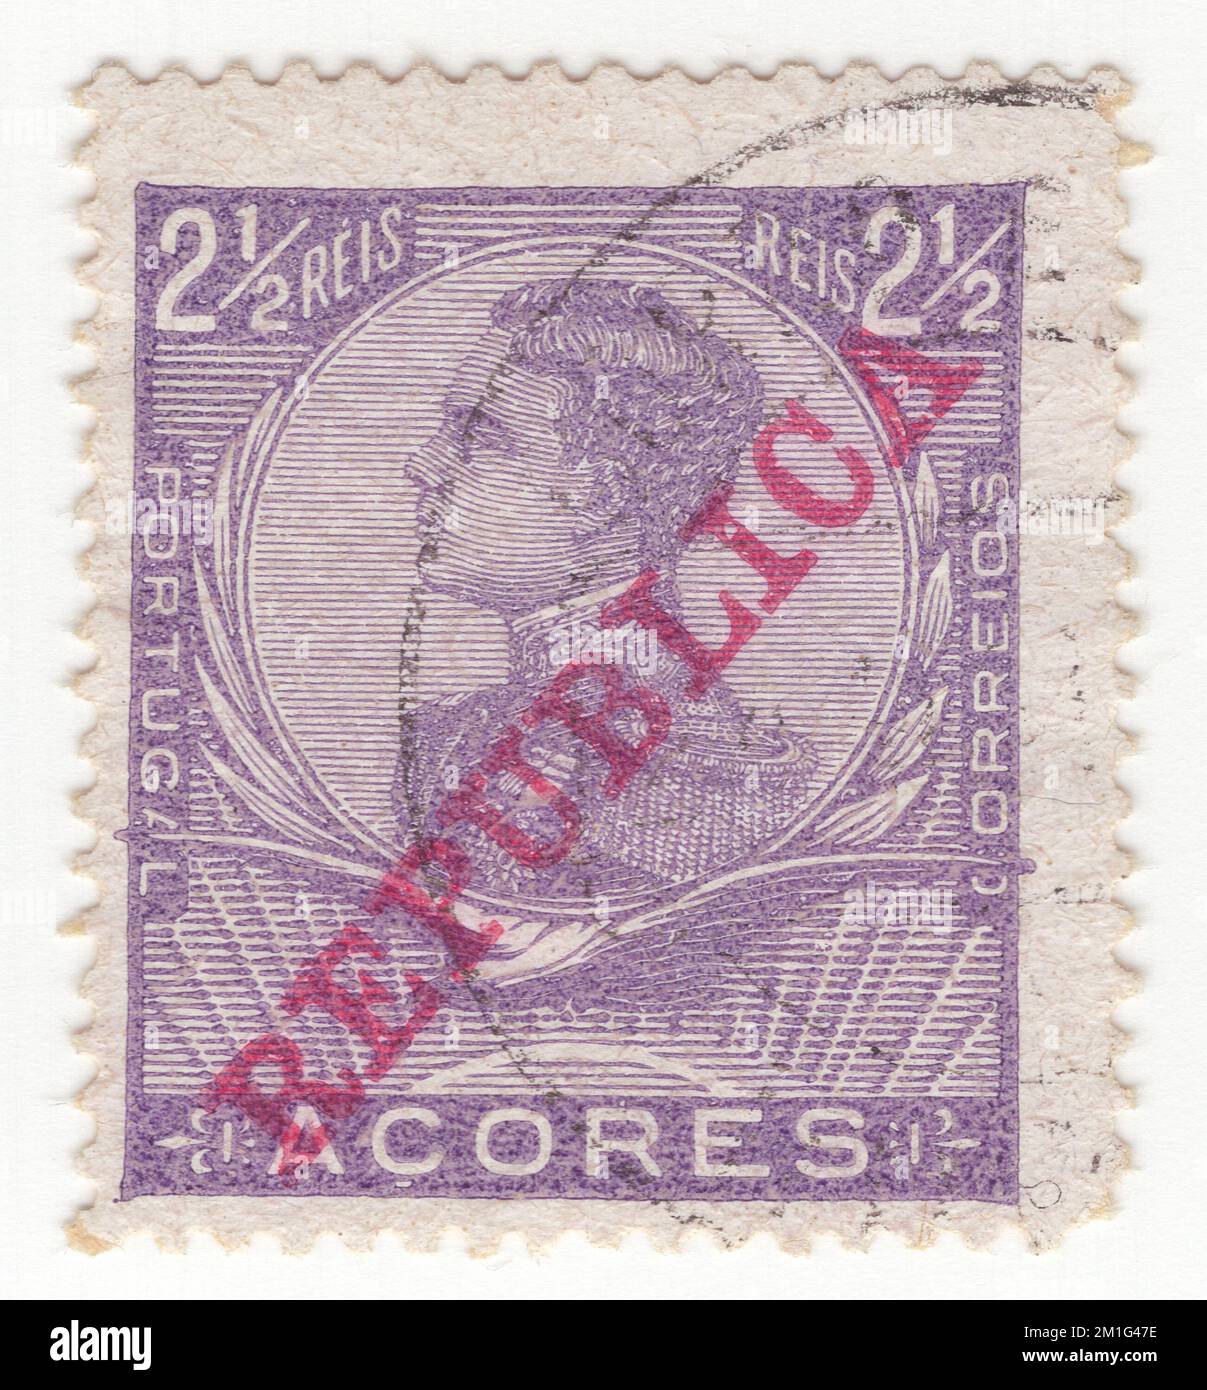 AZORES - CIRCA 1910: An old Azores used violet 2½ reis postage stamp. Stamps showing portrait of King Manuel II overprinted 'REPUBLICA' in carmine Stock Photo